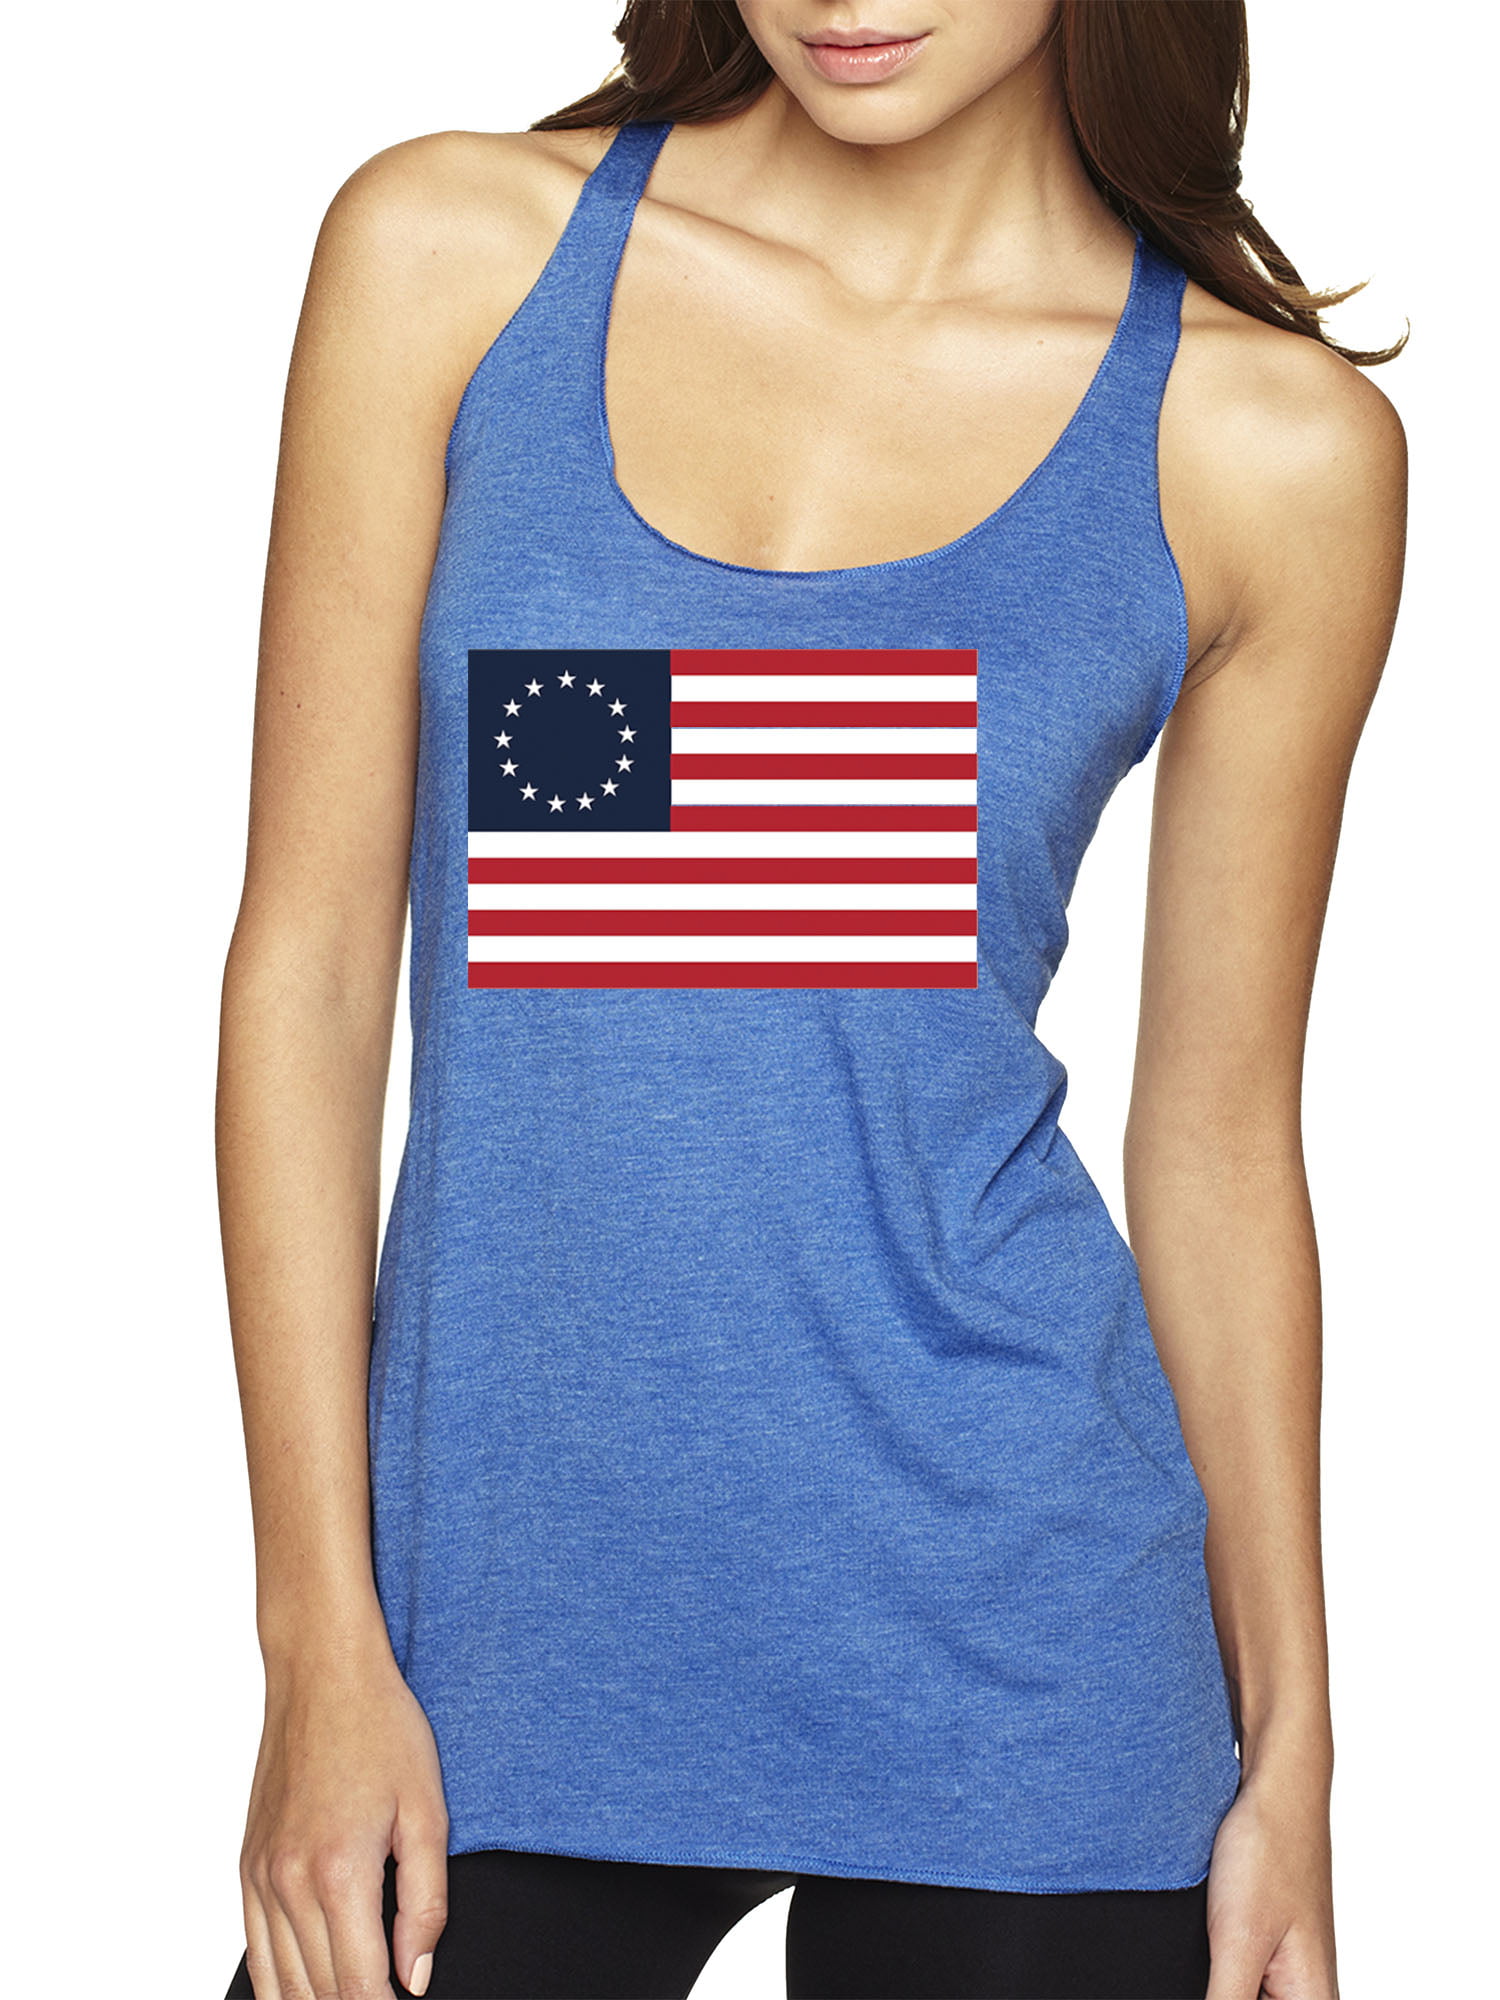 1776 Betsy Ross American Flag Tank Top